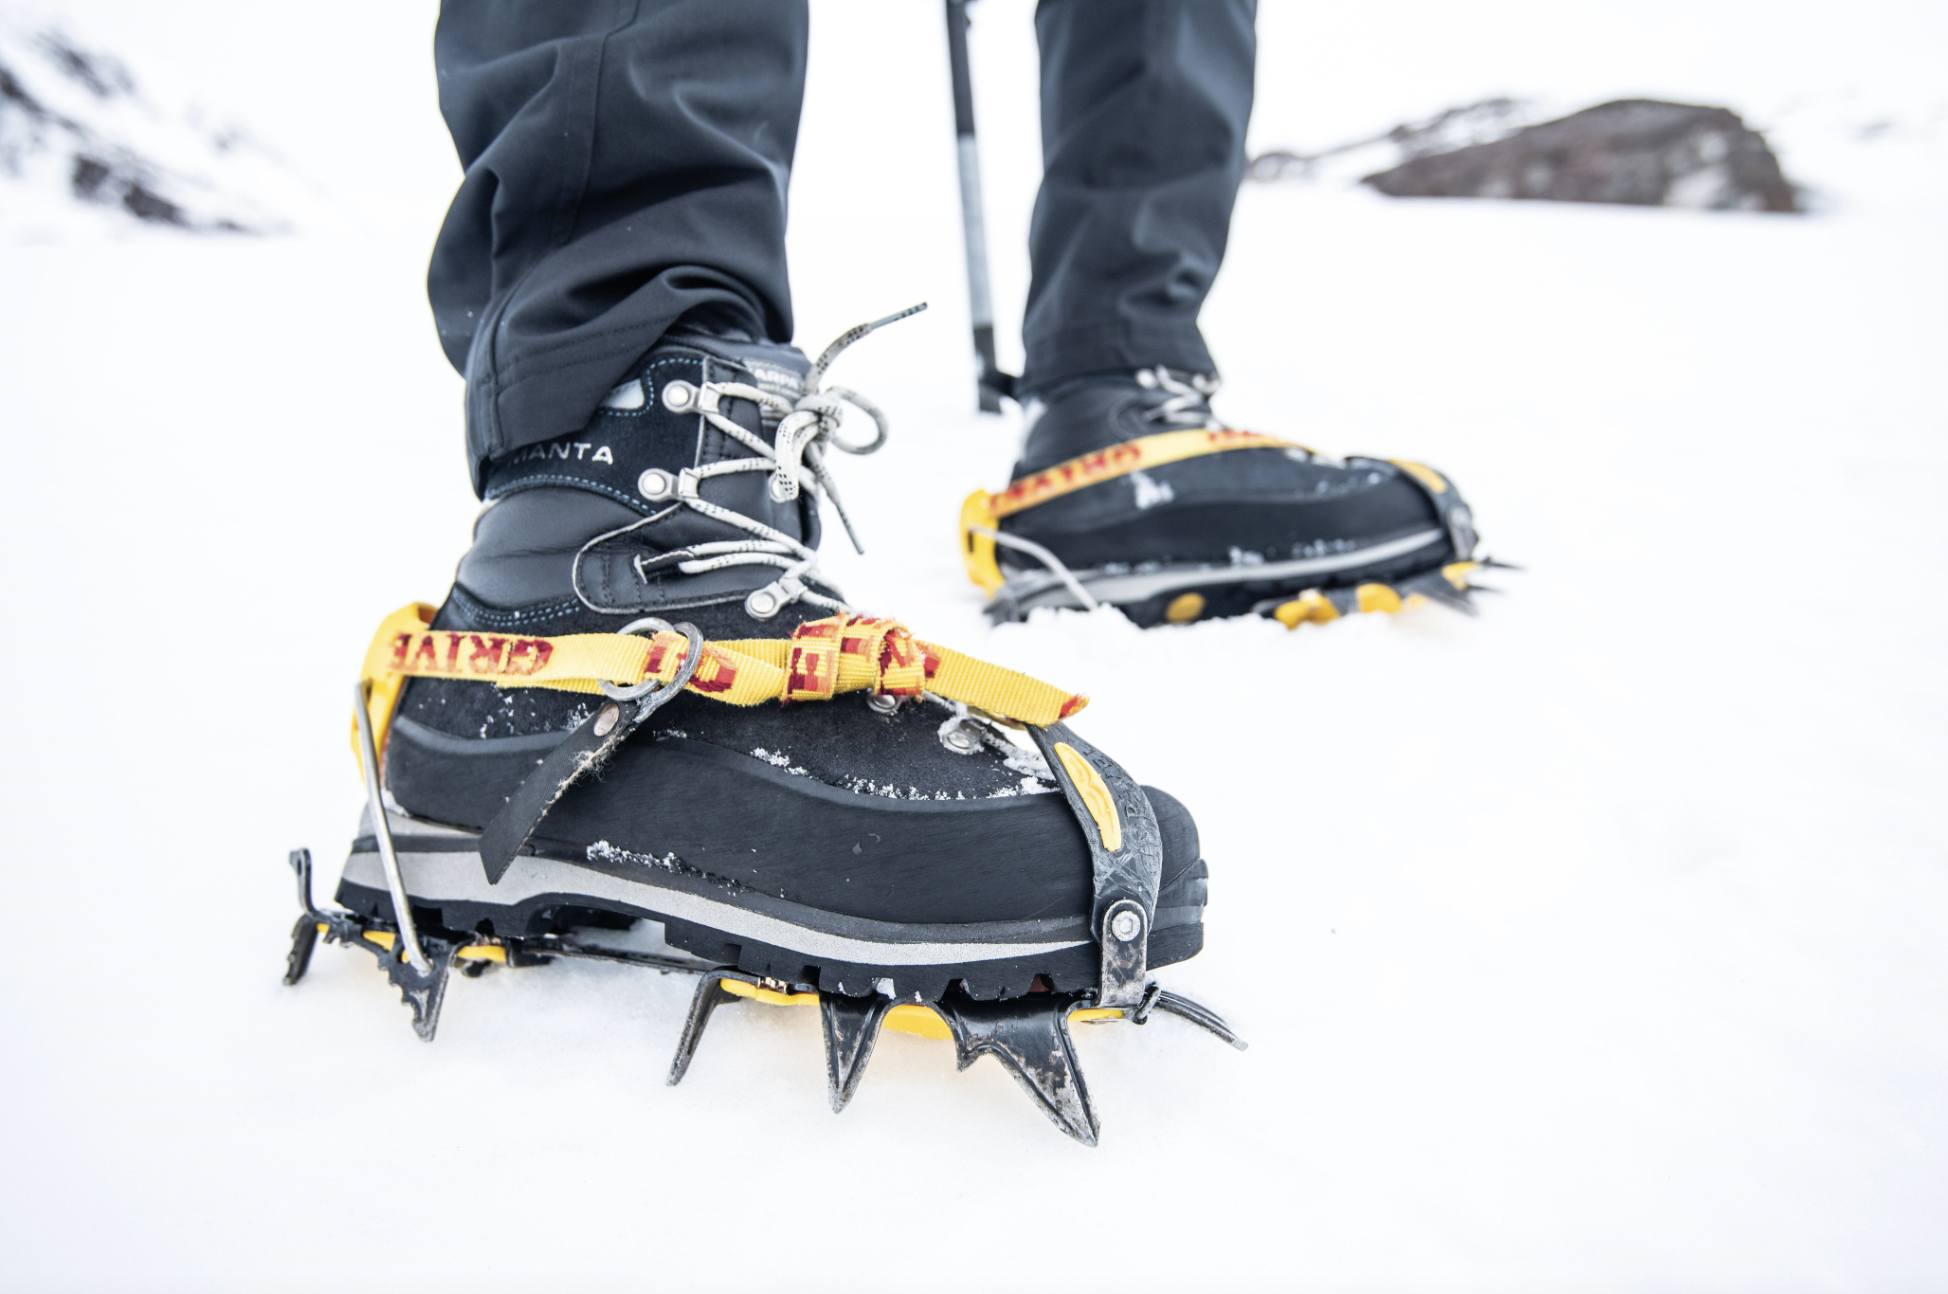 I don't ski at all, but I definitely want a pair of snow boots